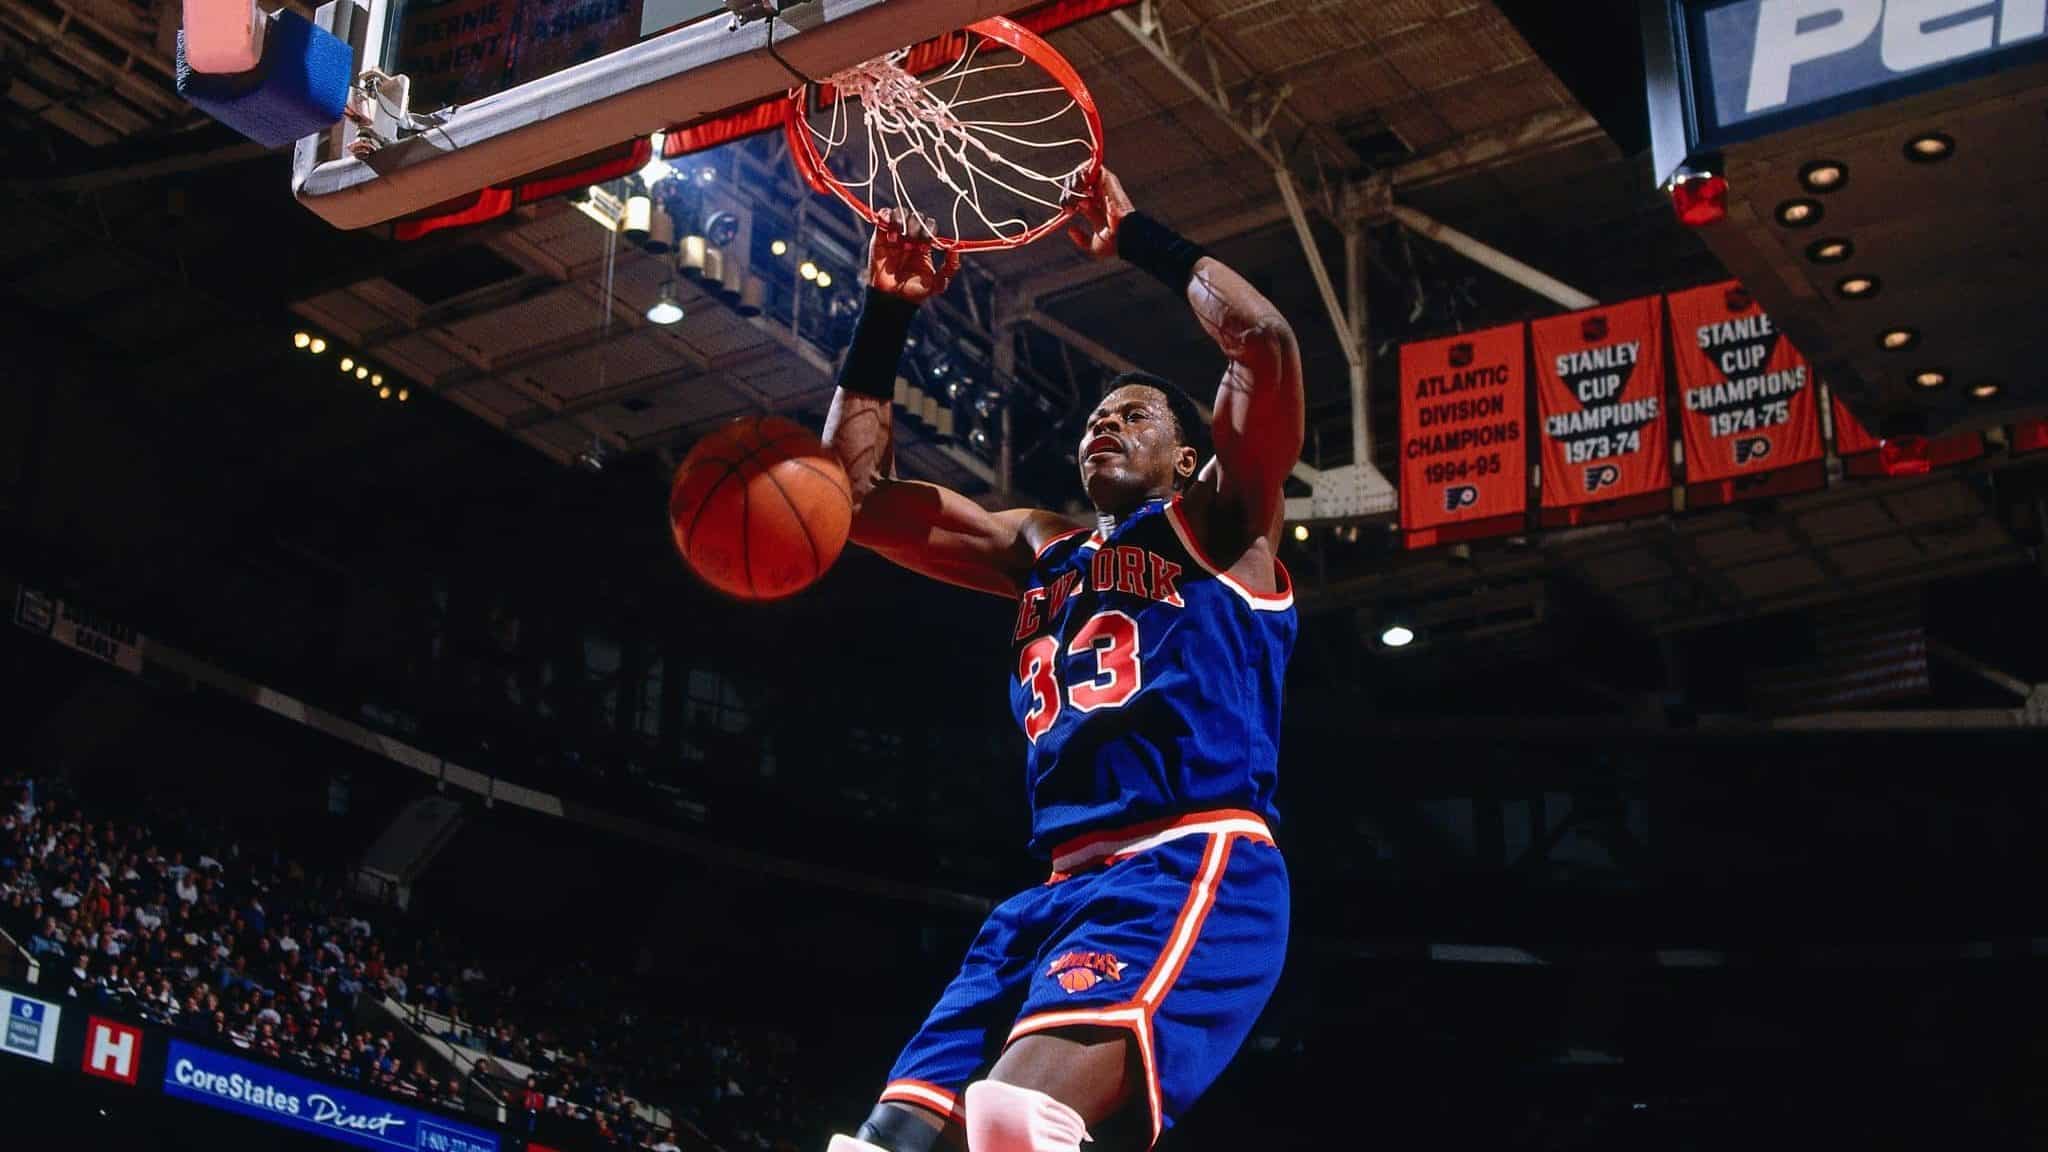 PHILADELPHIA, PA - 1996: Patrick Ewing #33 of the New York Knicks dunks against the Philadelphia 76ers during a game played circa 1996 at the Spectrum in Philadelphia, Pennsylvania. NOTE TO USER: User expressly acknowledges and agrees that, by downloading and or using this photograph, User is consenting to the terms and conditions of the Getty Images License Agreement. Mandatory Copyright Notice: Copyright 1996 NBAE